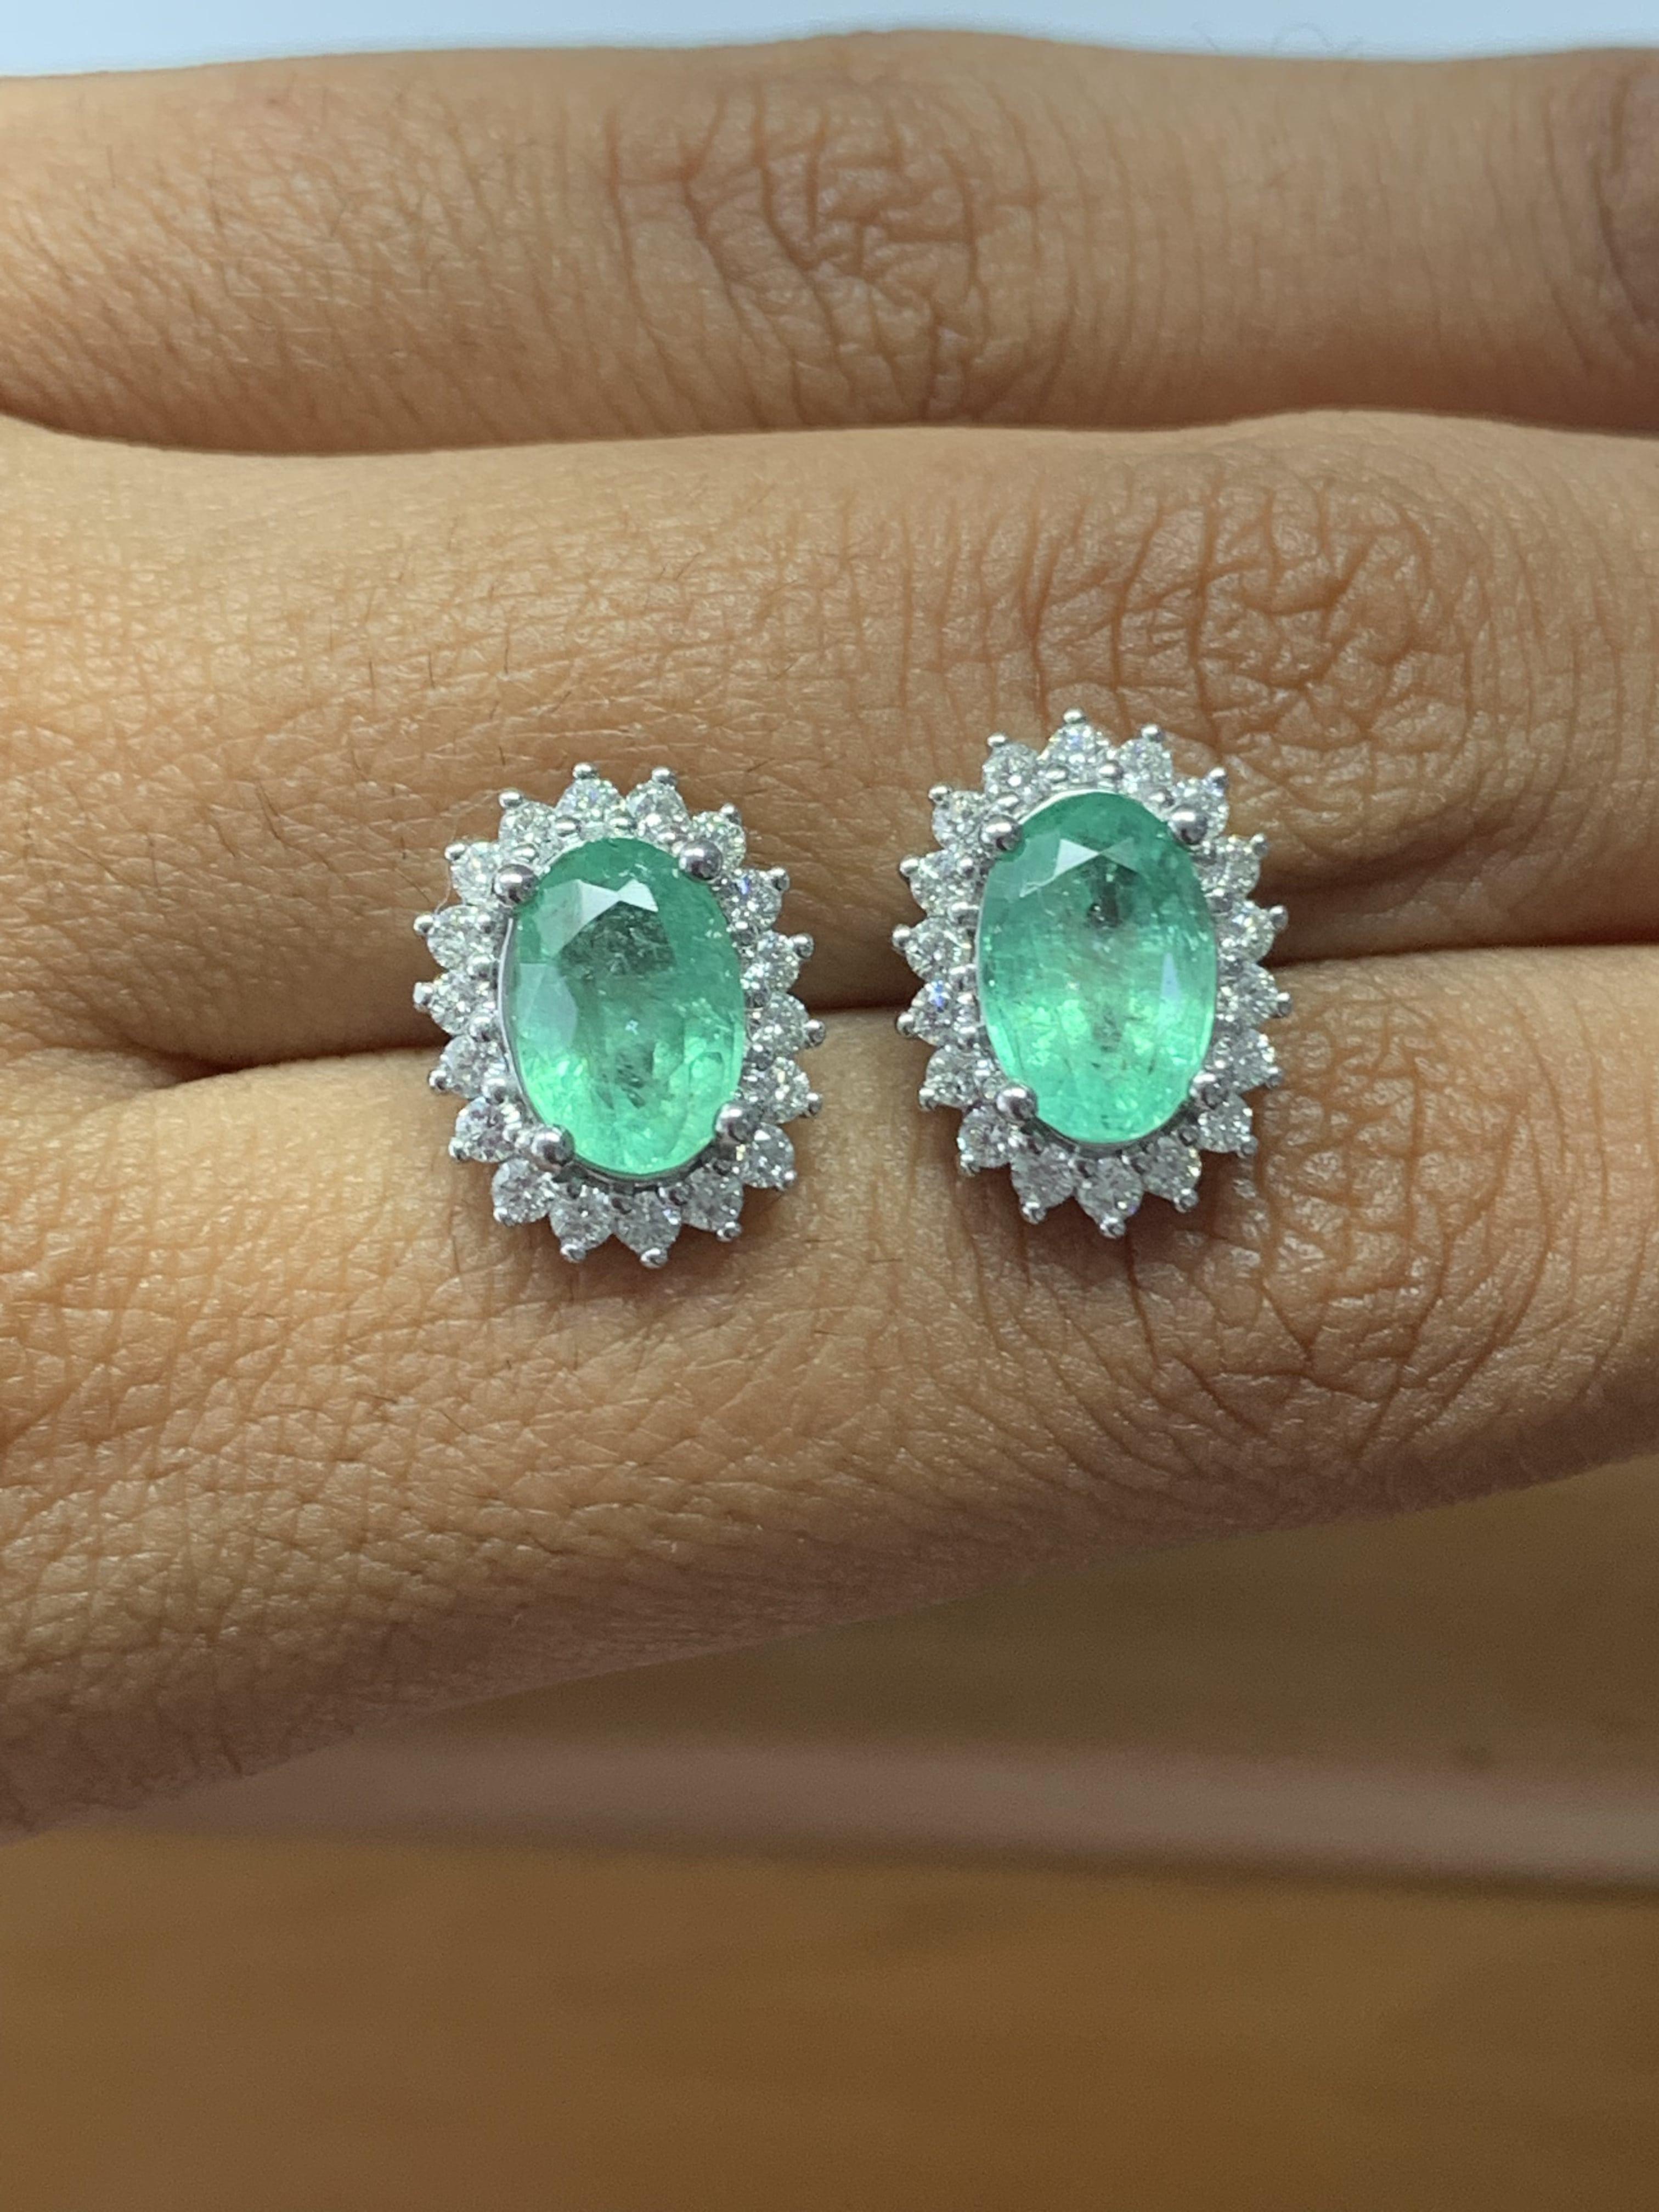  2.96 Carat Emerald Stud Earrings with Natural Diamonds in 18K White Gold  For Sale 1